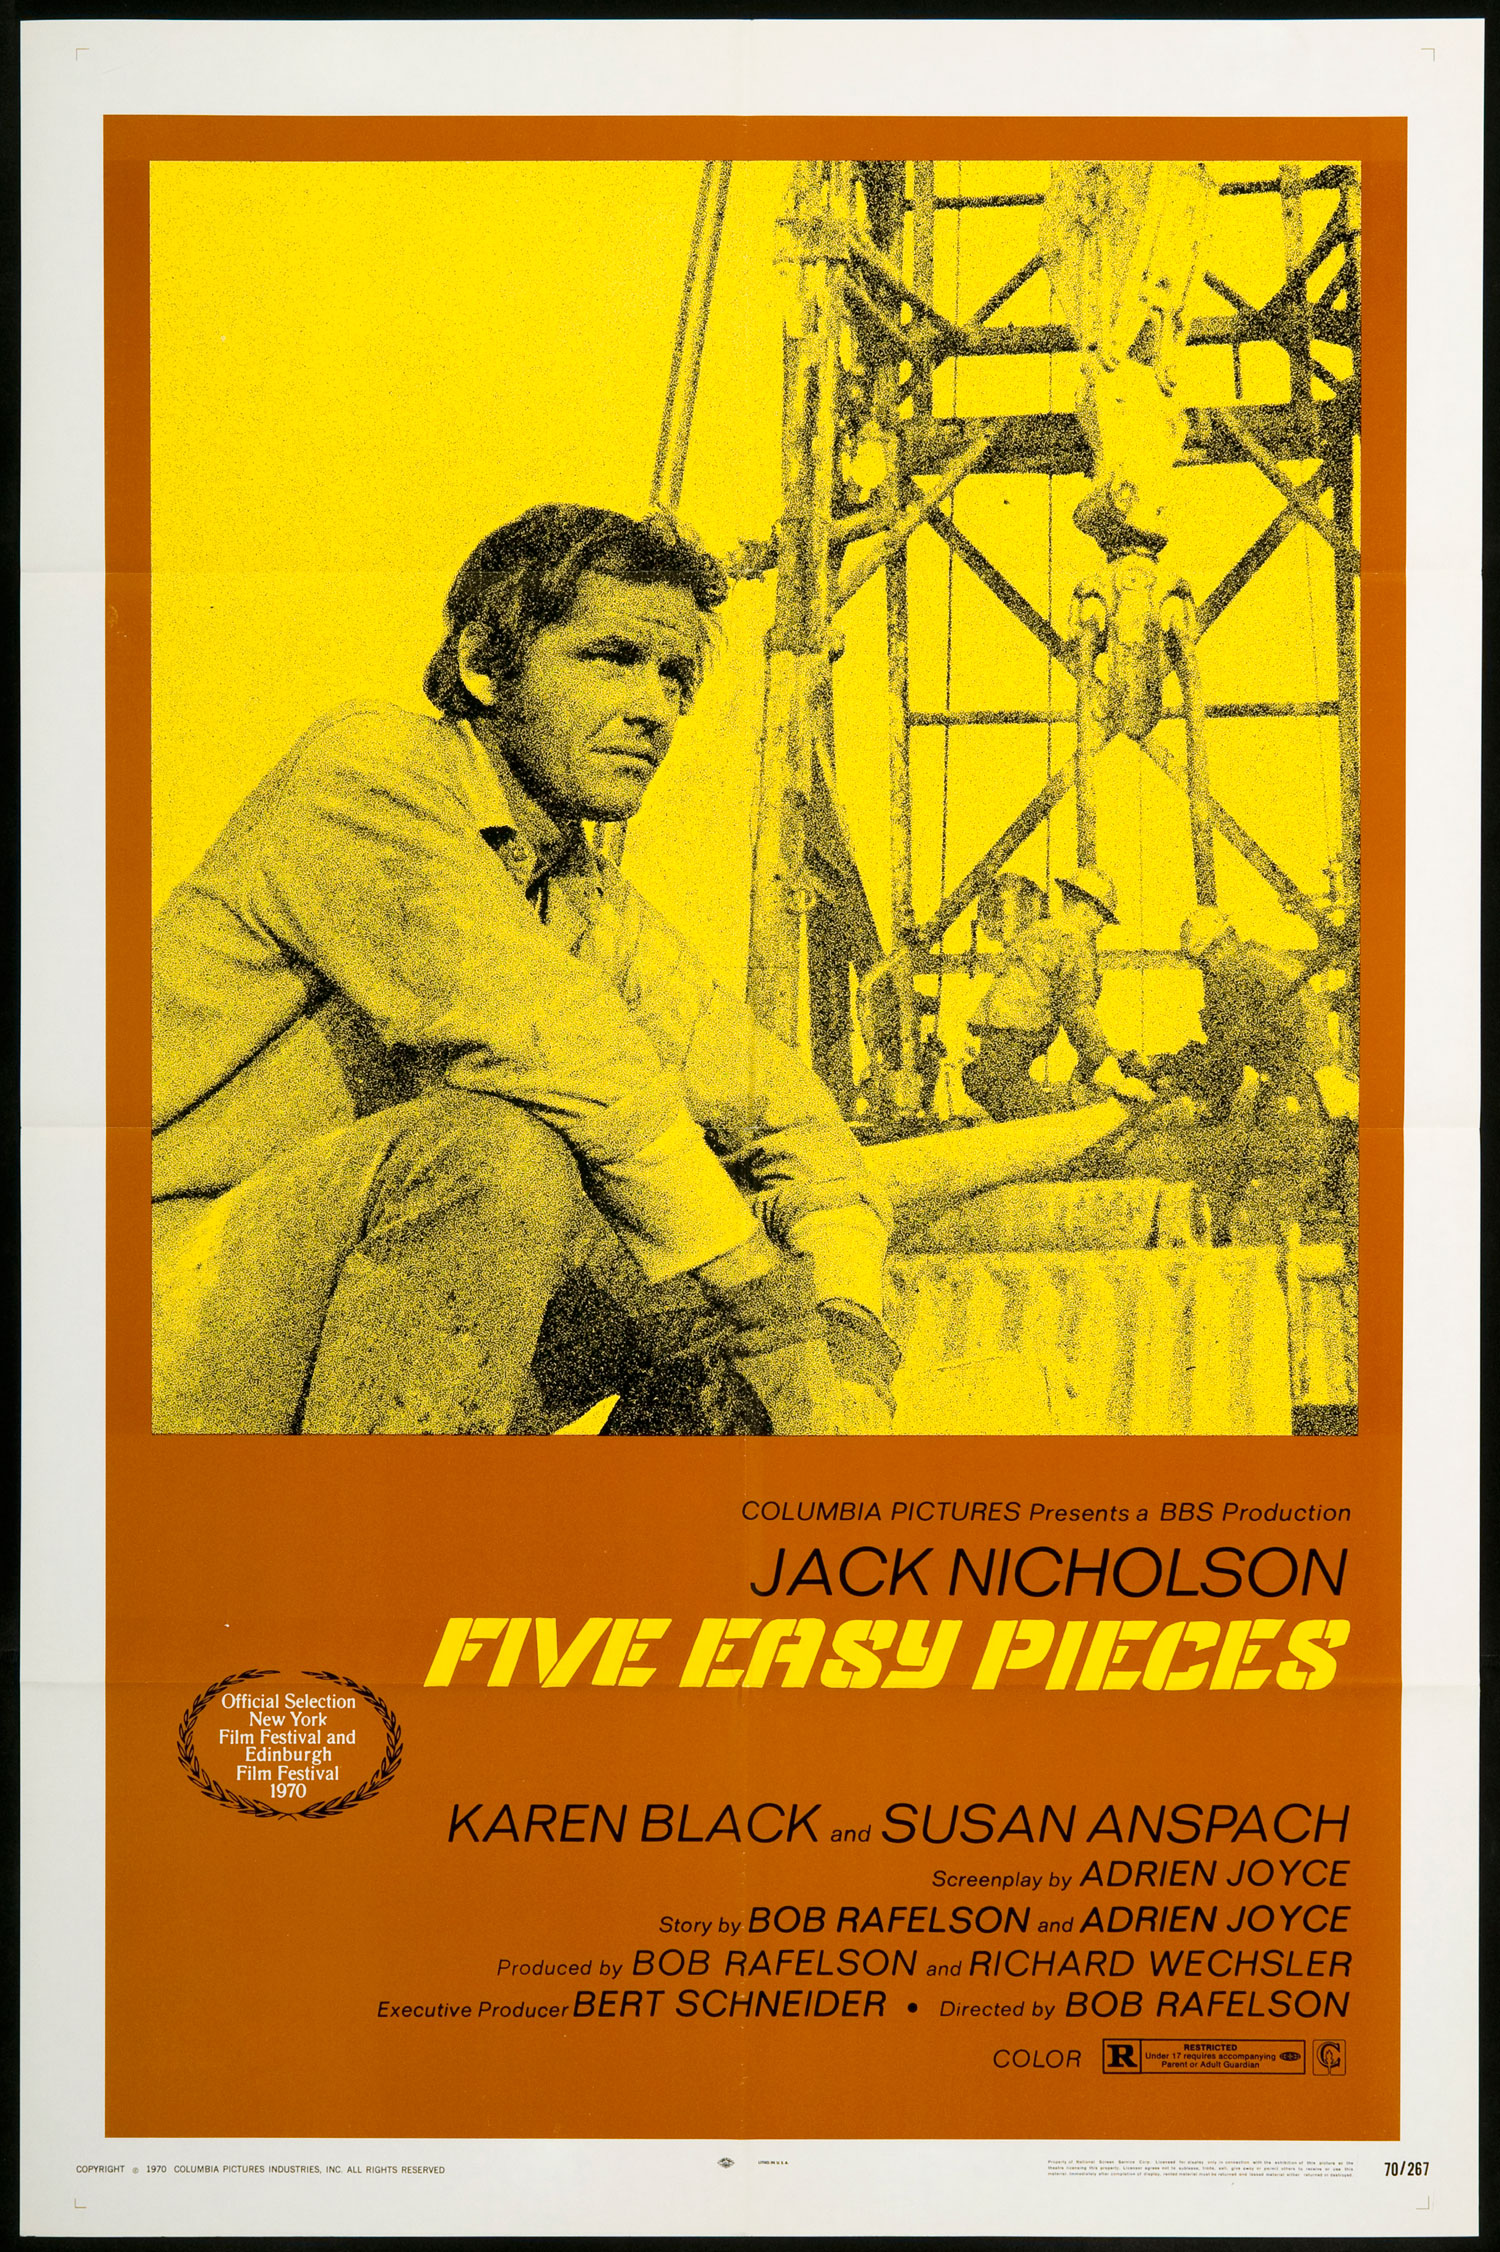 https://fourthandsycamore.files.wordpress.com/2015/04/five-easy-pieces-poster.jpg